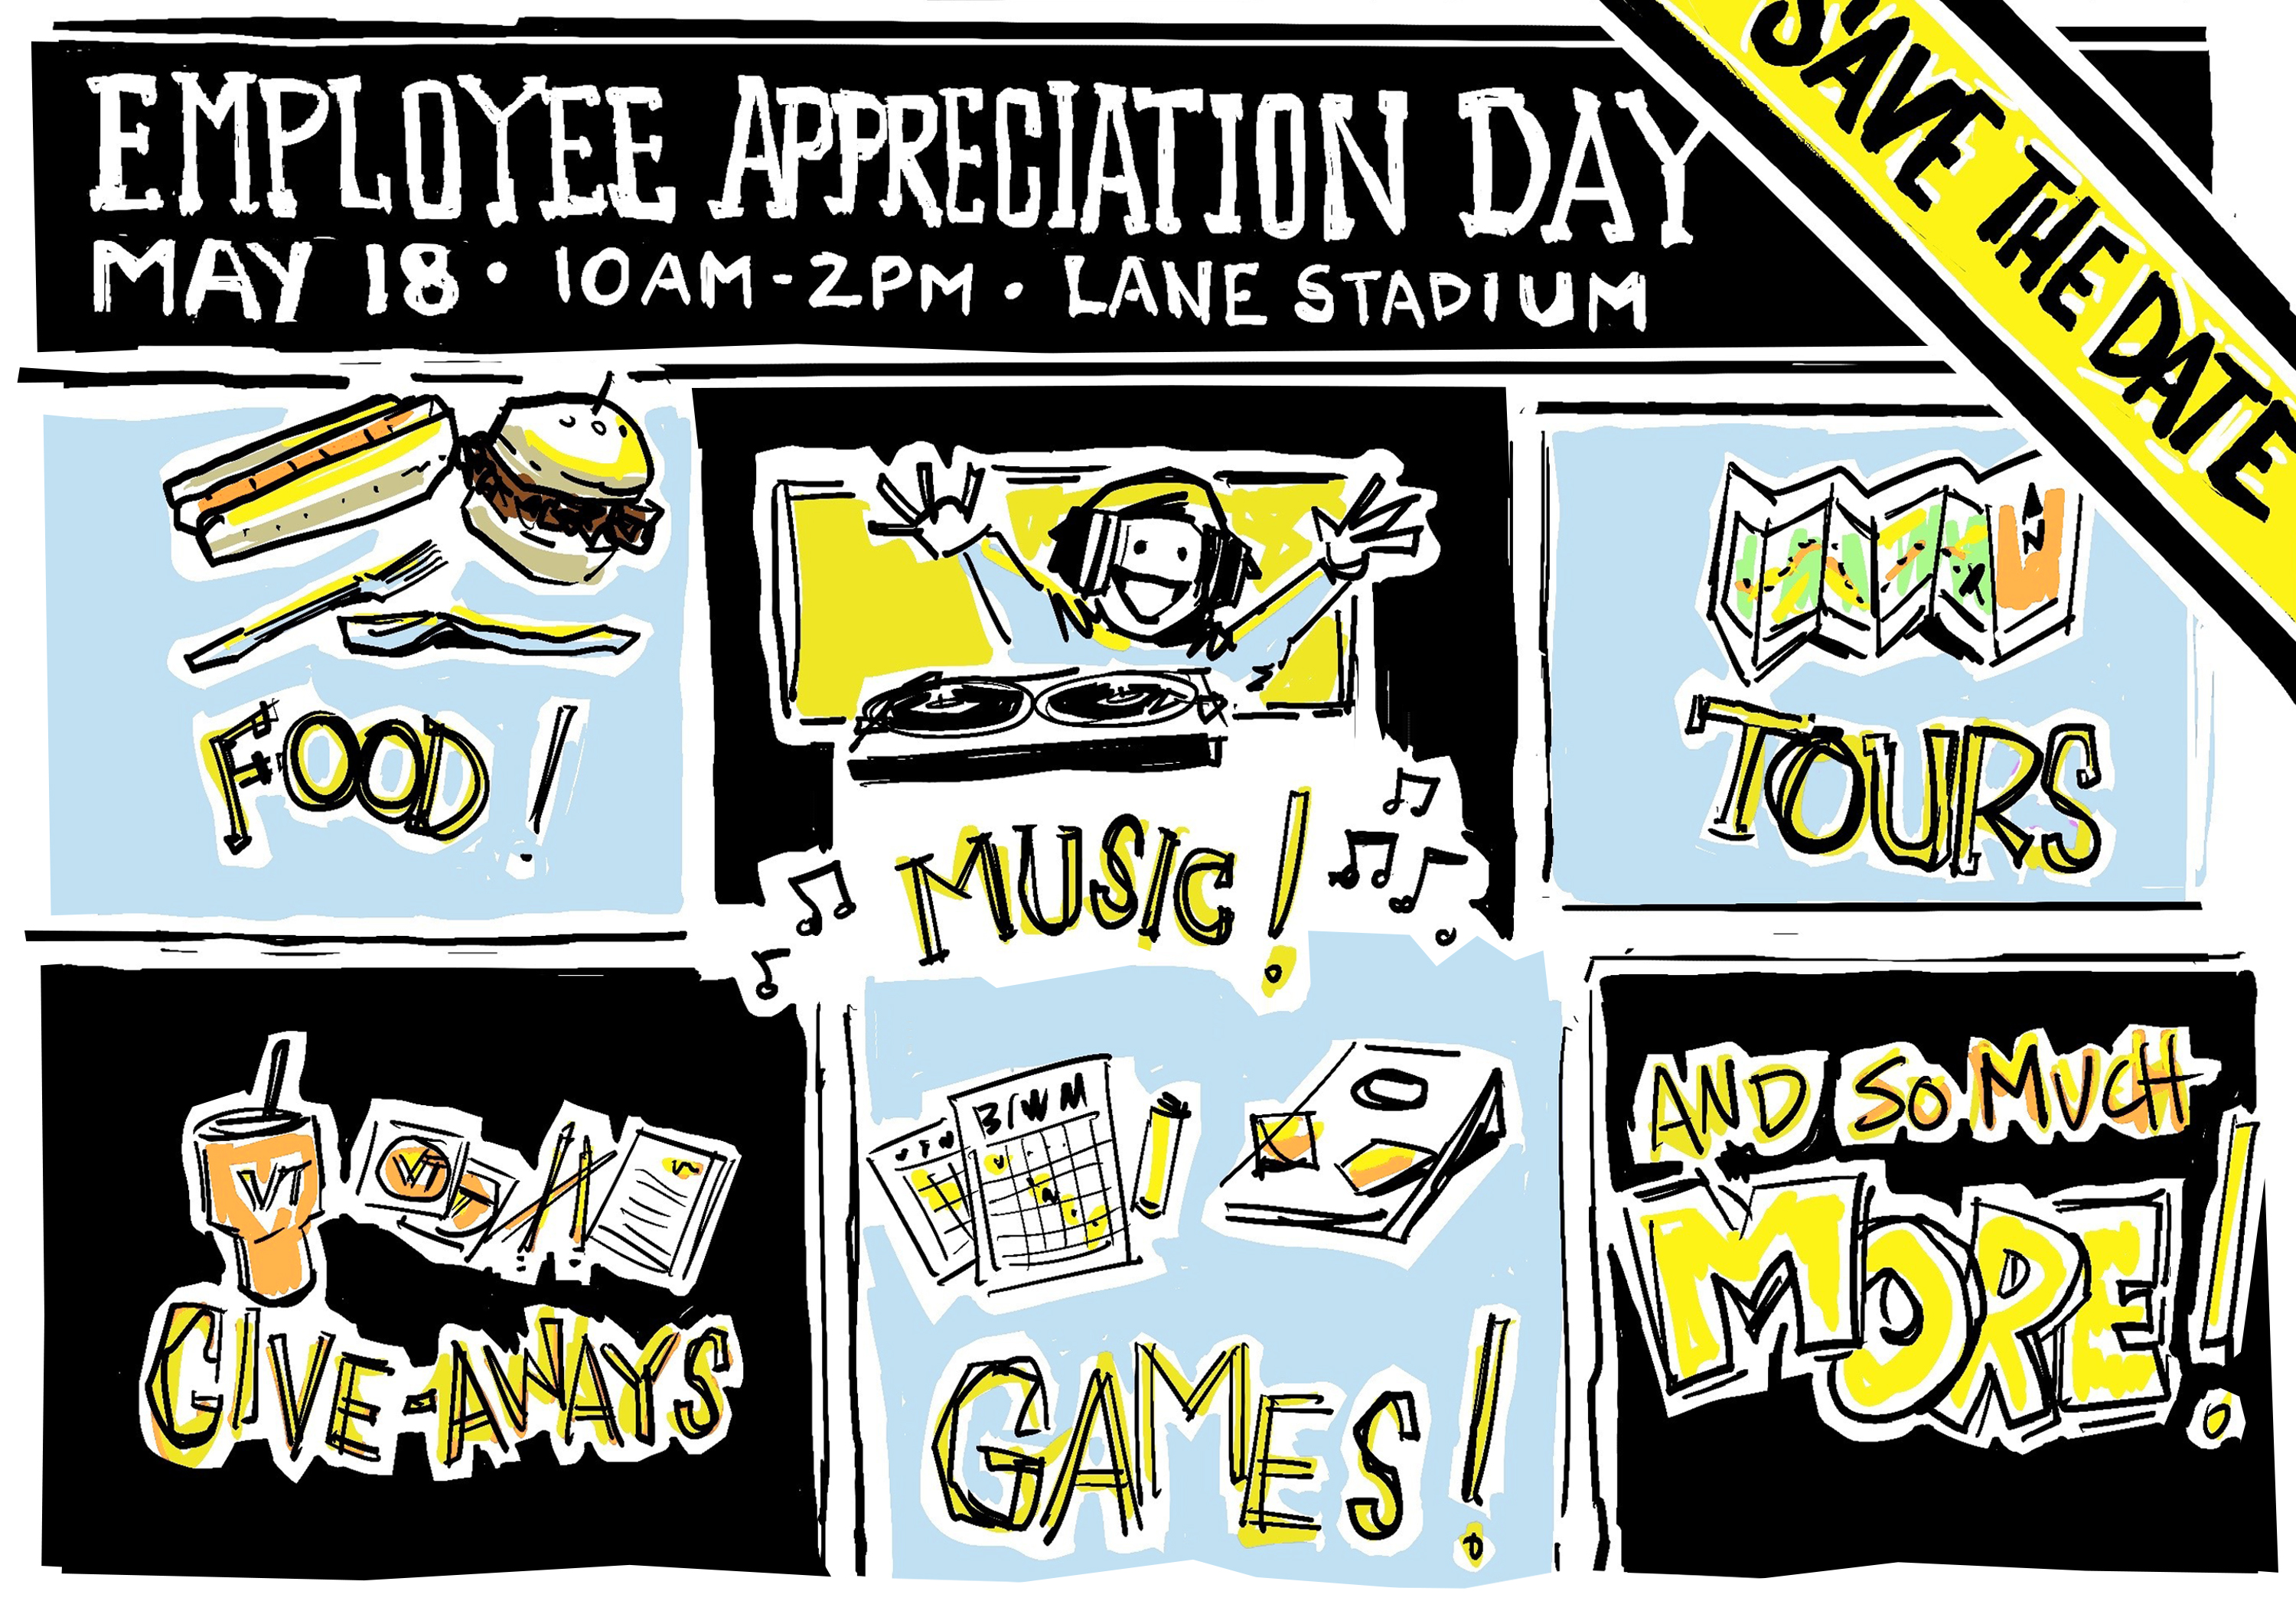 Digital promotion of the employee appreciation day on may 18 from 10 to 2 in lane stadium